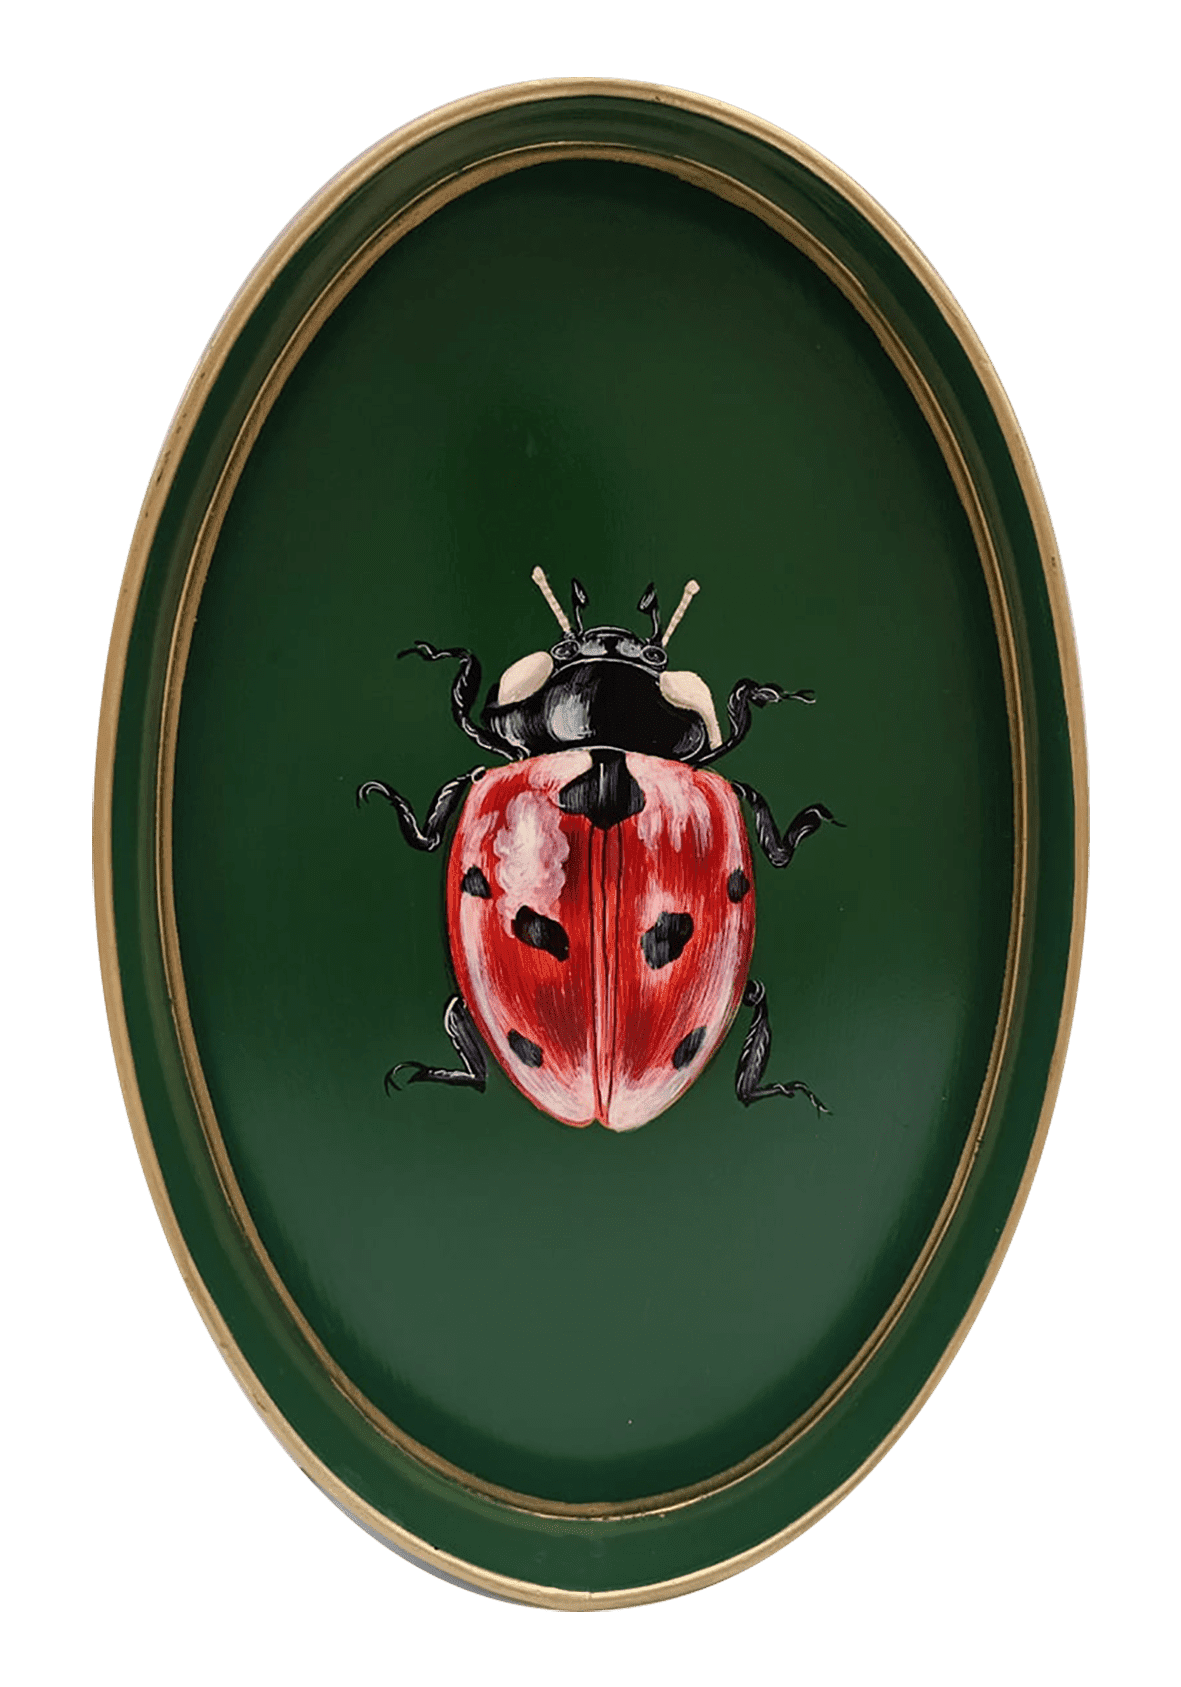 An oval shapped iron tray thattray features a hand-painted illustration of a Ladybird on a deep forest green background with a stylish gold border.